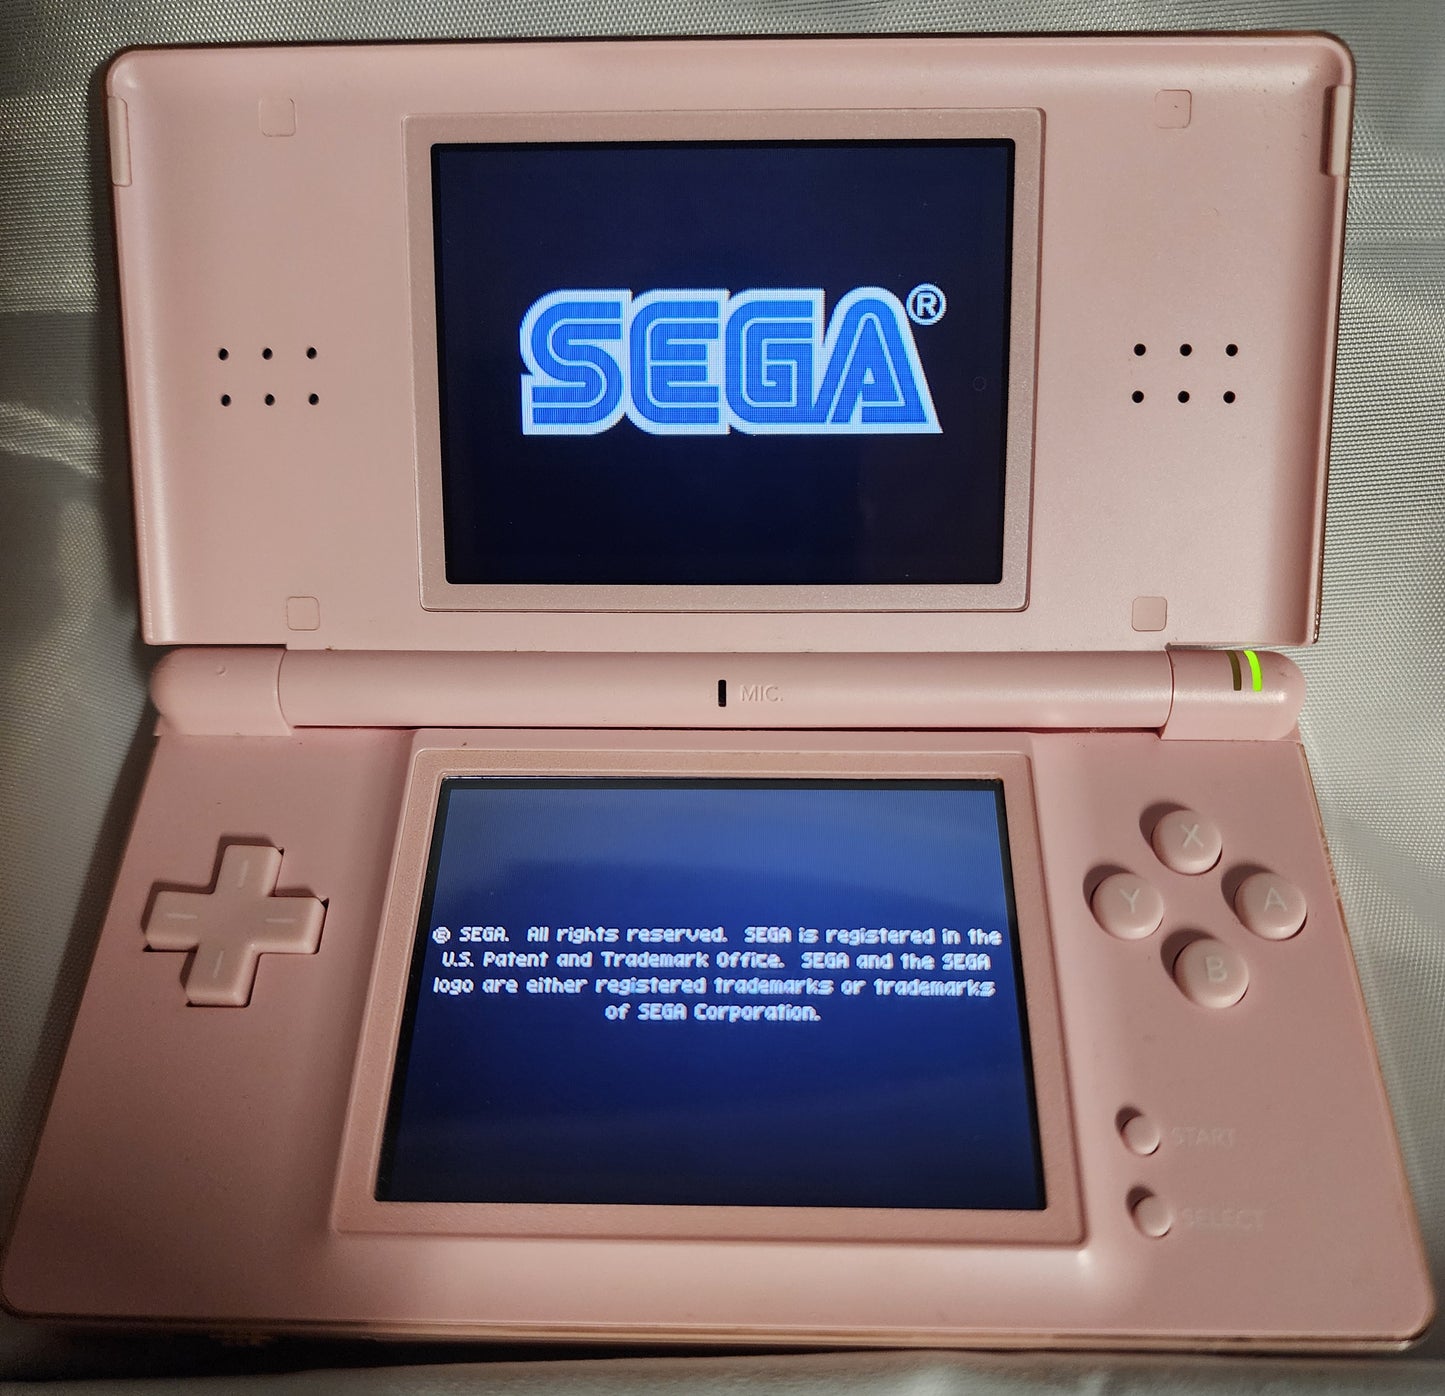 Pink DSlite. Stylus Included. Works Great. No Charger